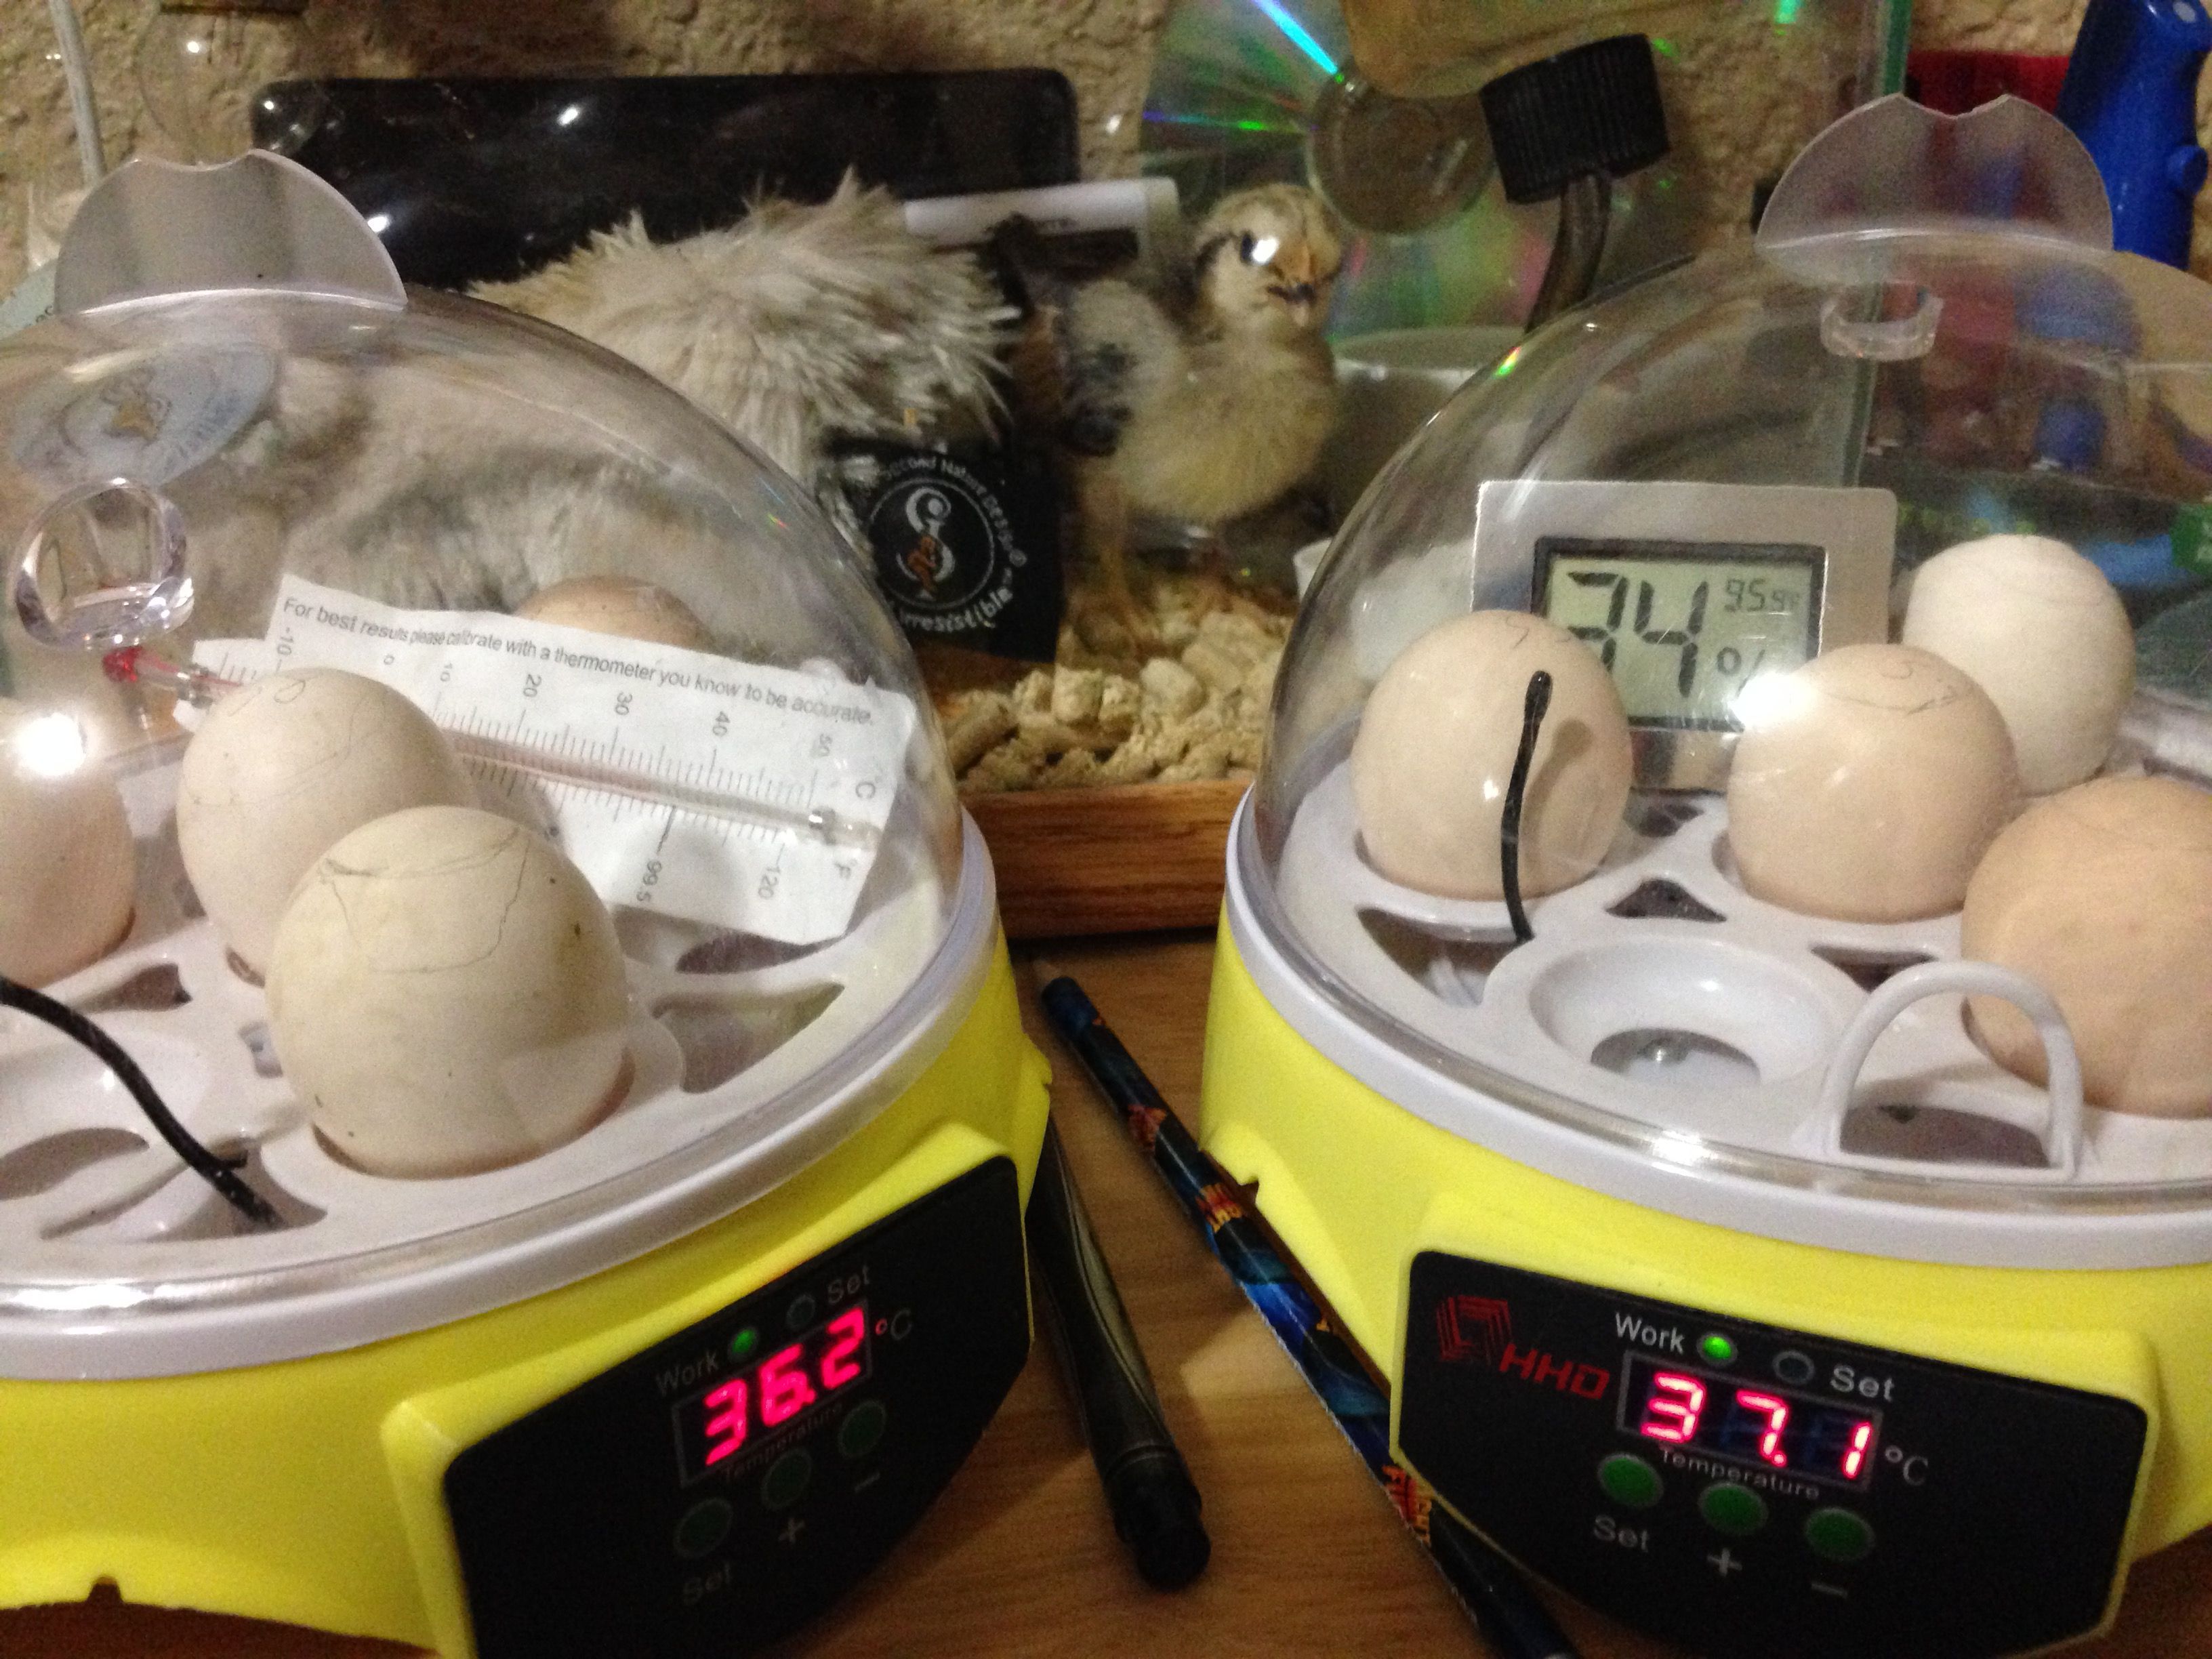 Third attempt with a new incubator.
Set for the Halloween Hatch-a-long on Oct 11, 2015